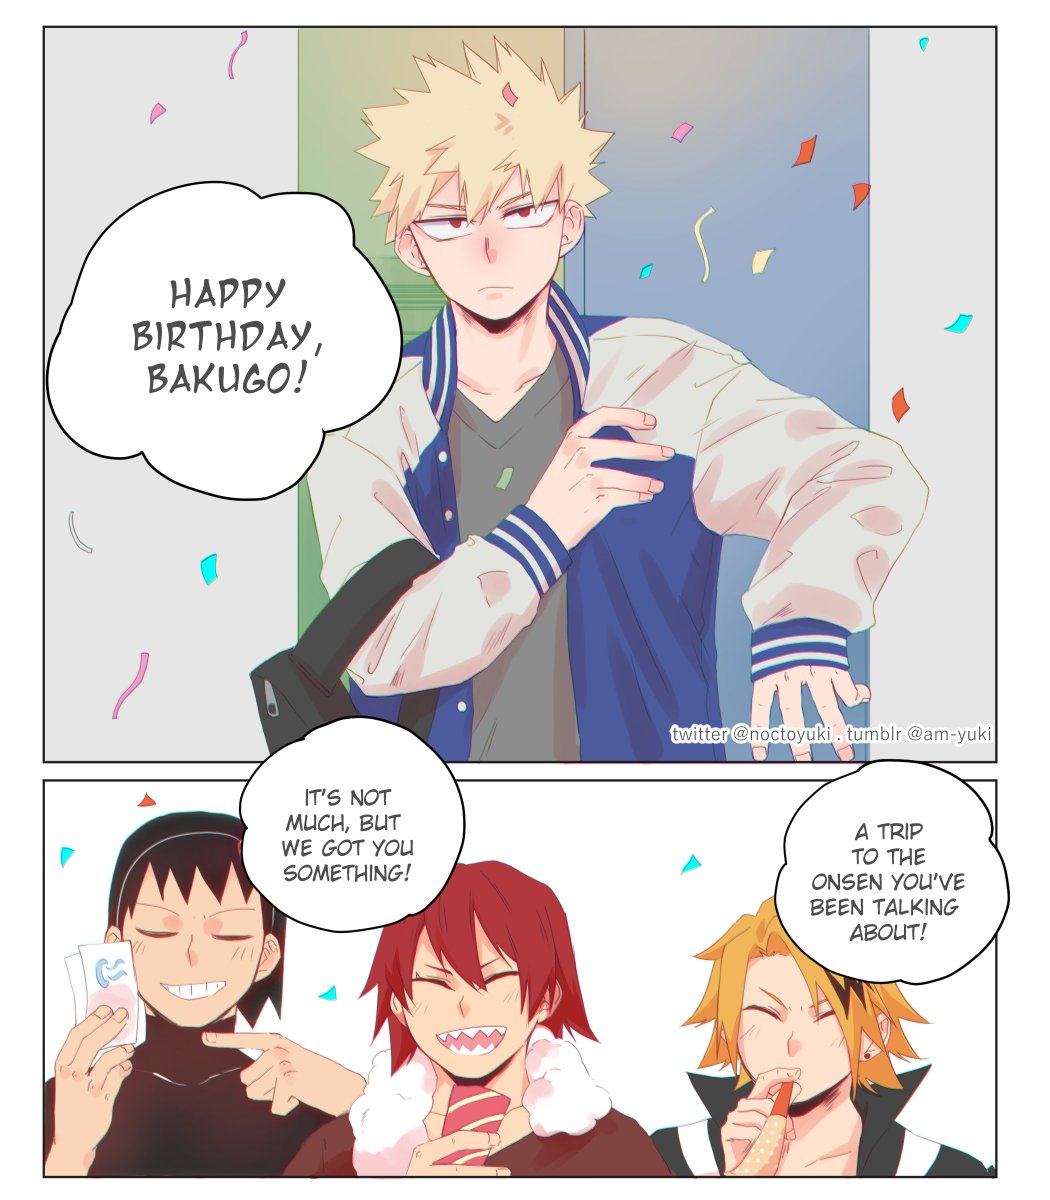 Day...6,,,,, to Kacchan's birthday. ?
The best gift, perhaps?

Also a prompt by @/LadyBookman666 